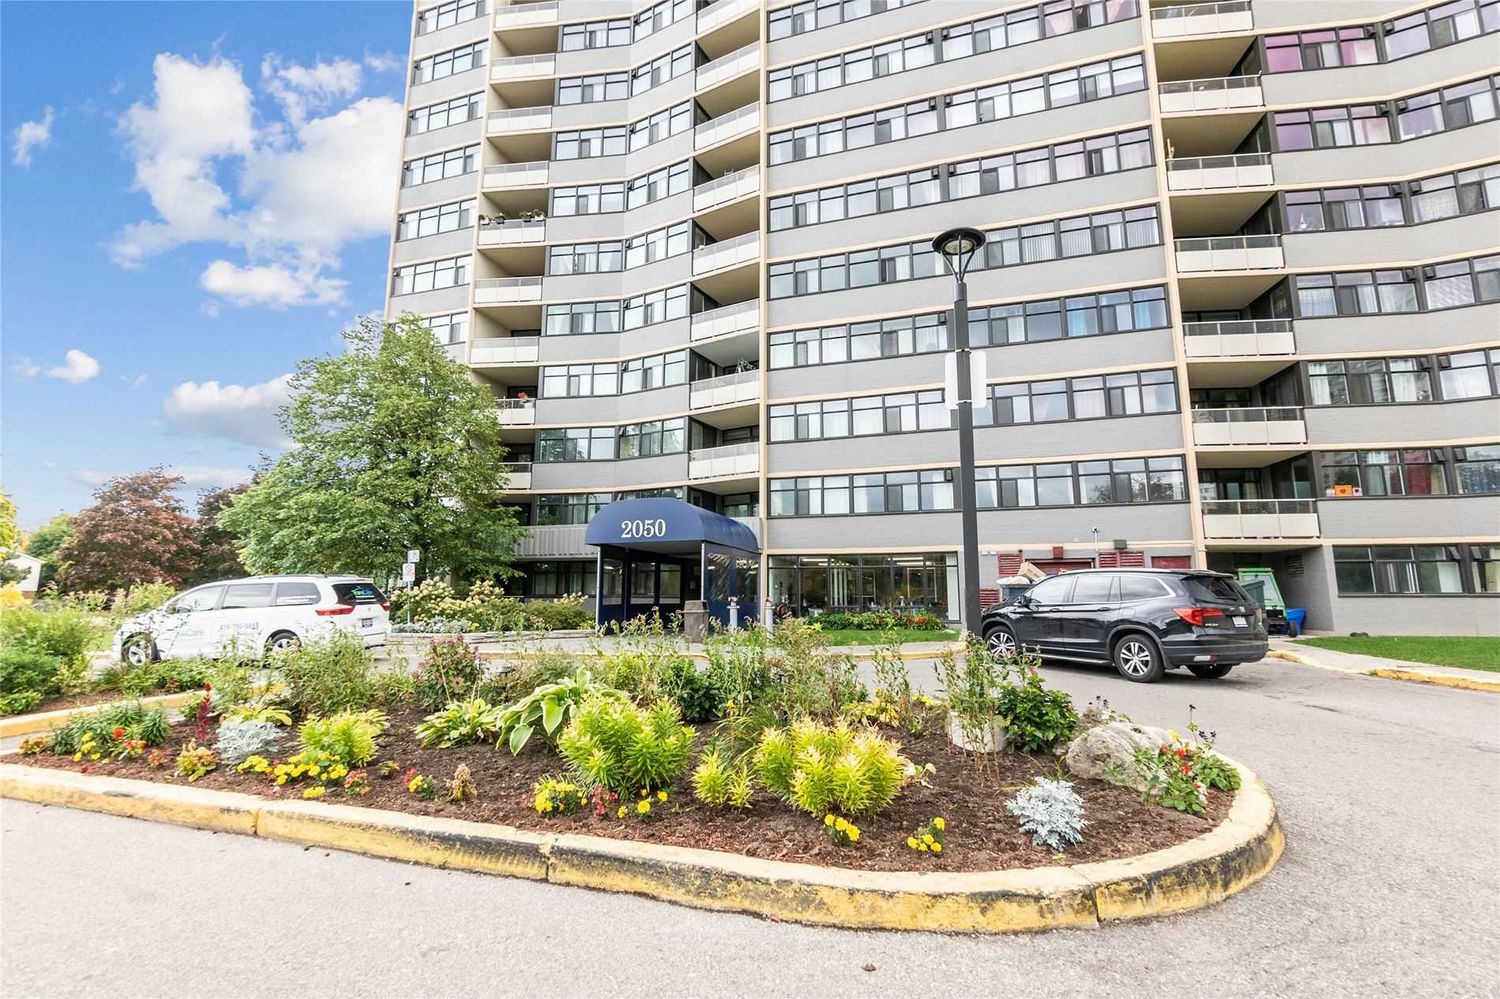 2050 Bridletowne Circ. Newhaven Condos is located in  Scarborough, Toronto - image #2 of 2